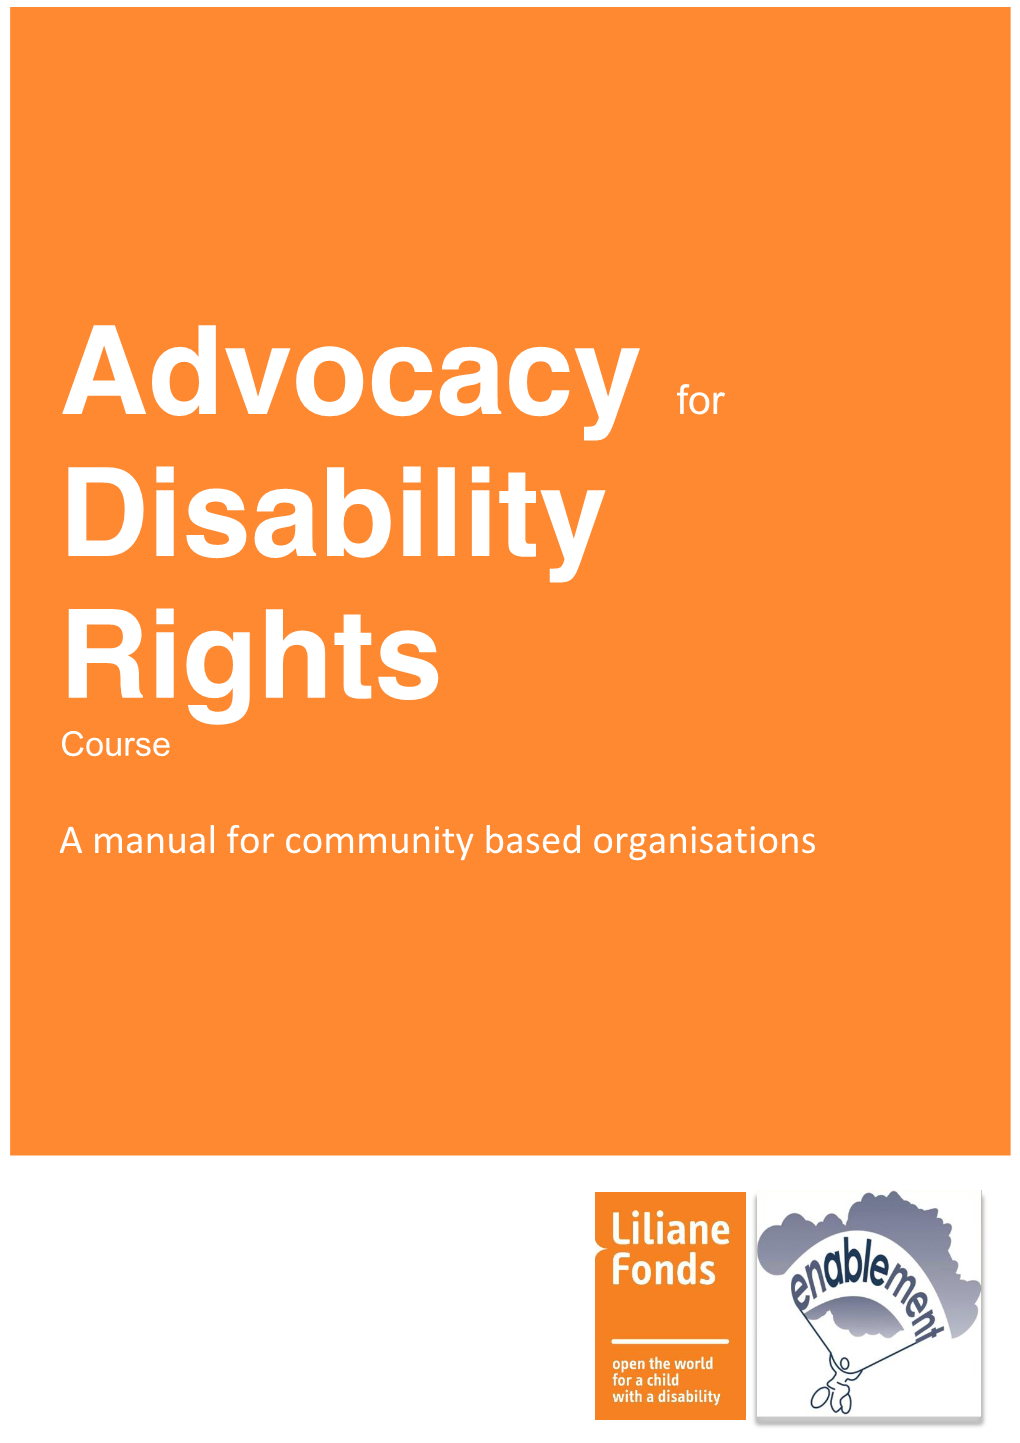 Advocacy for Disability Rights Course